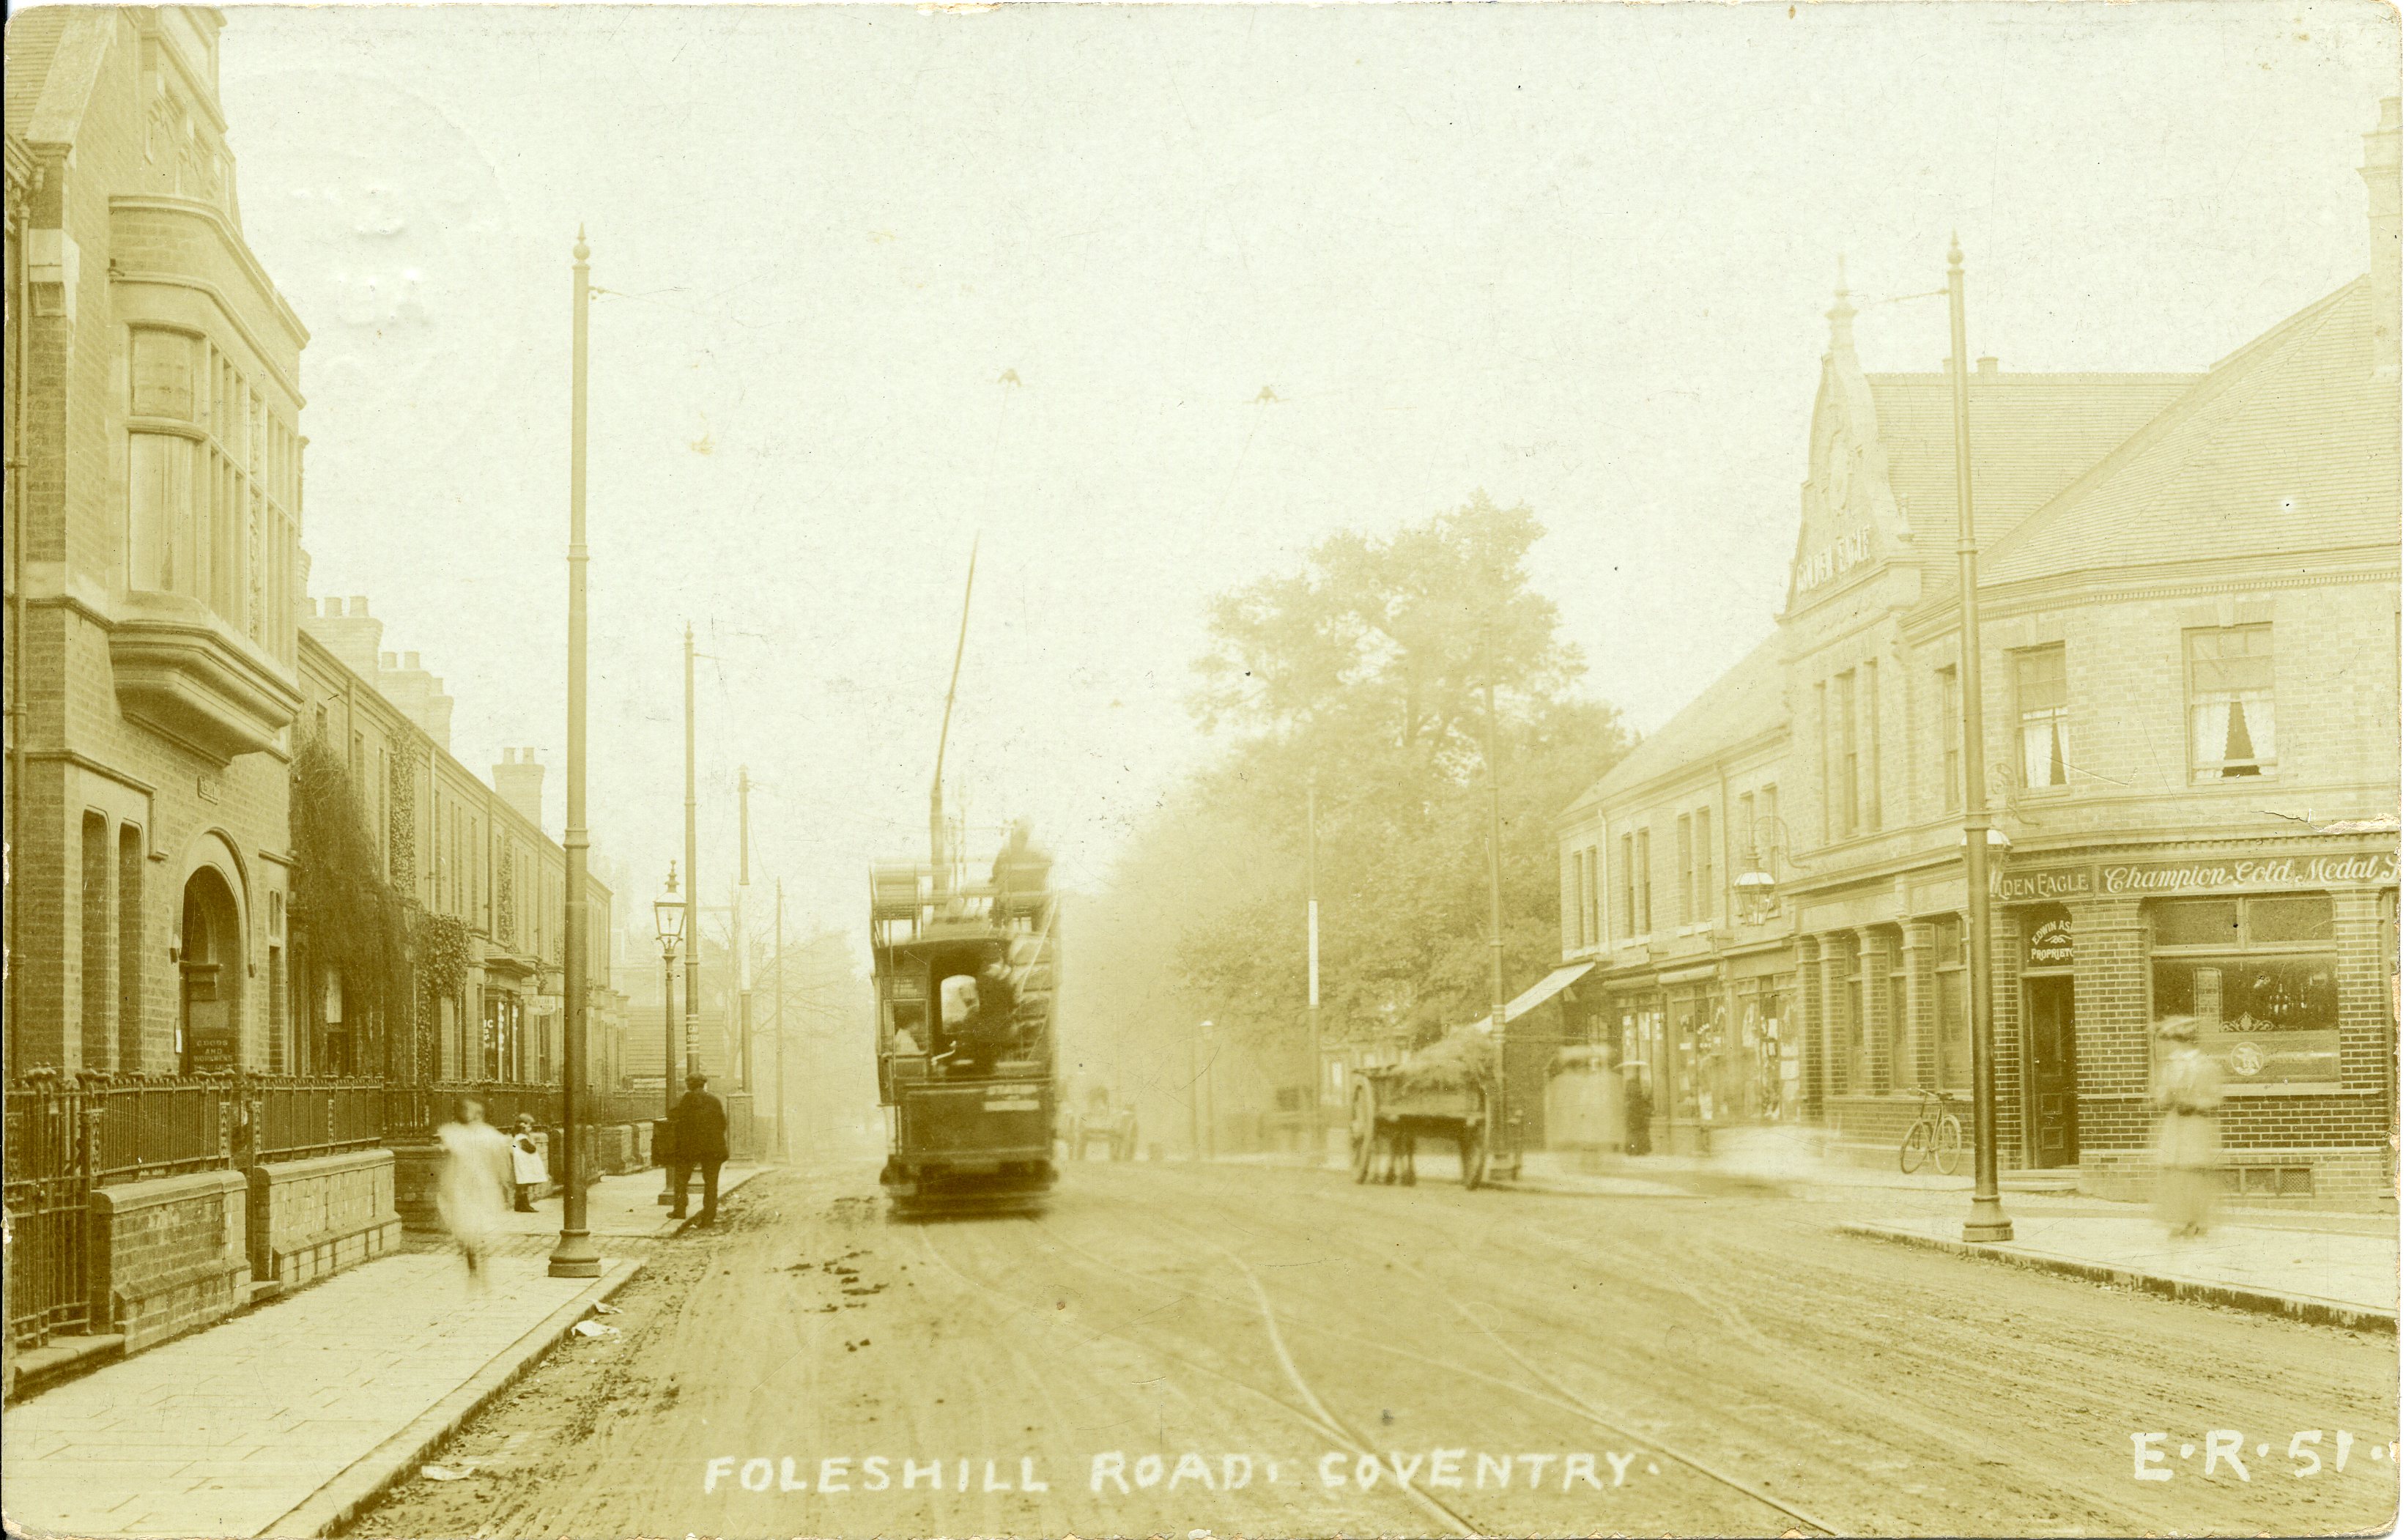 An old, sepia photo of the Foleshill Road with a tram